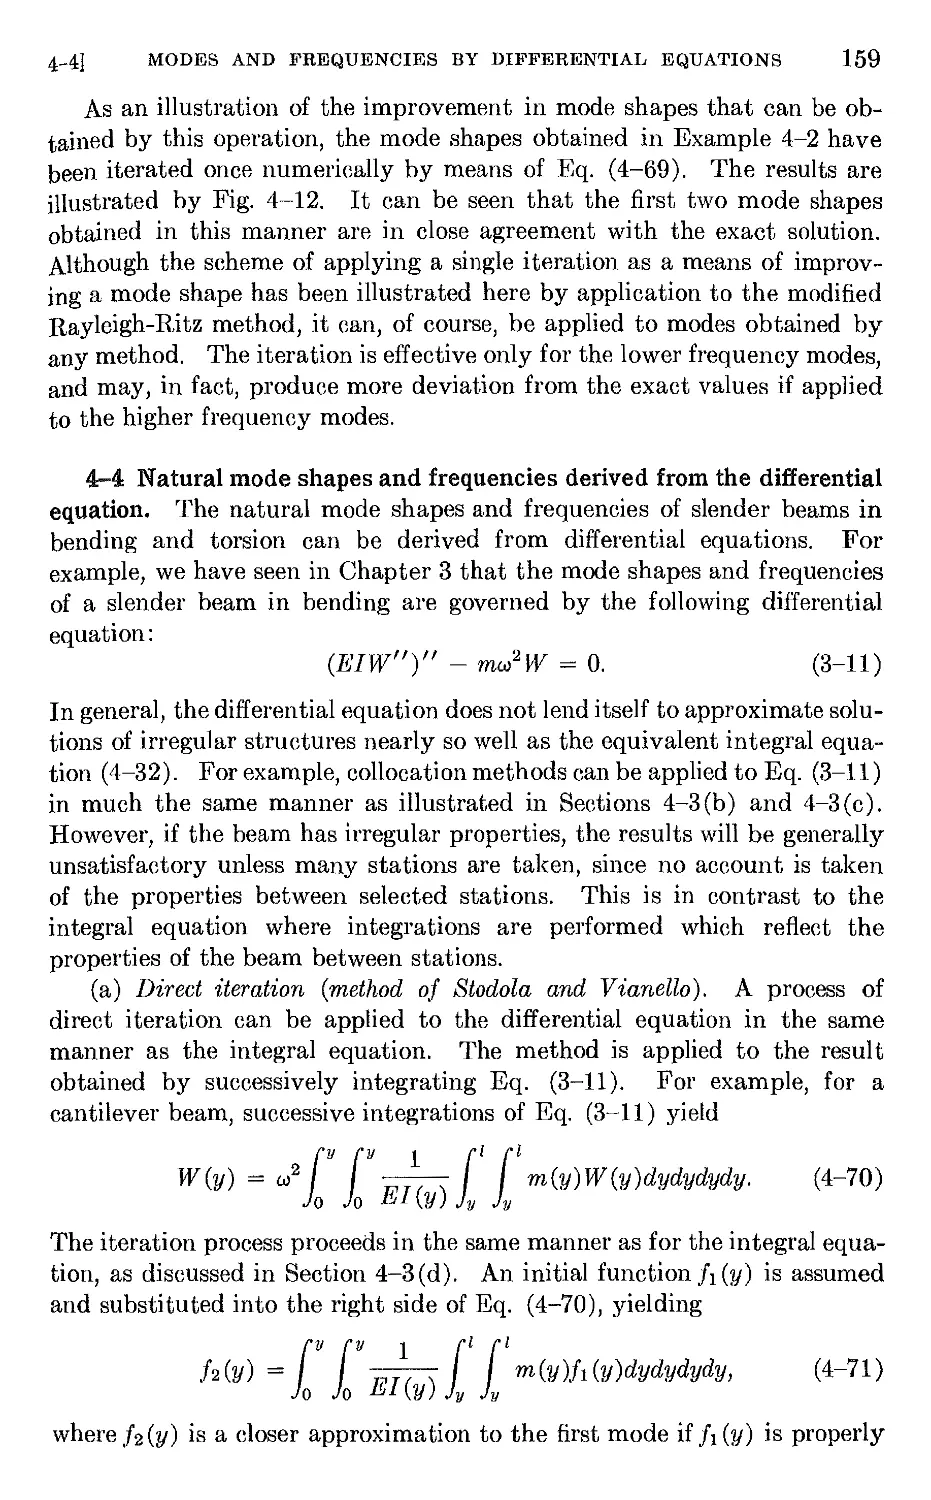 4.4 Natural mode shapes and frequencies derived from the differential equation